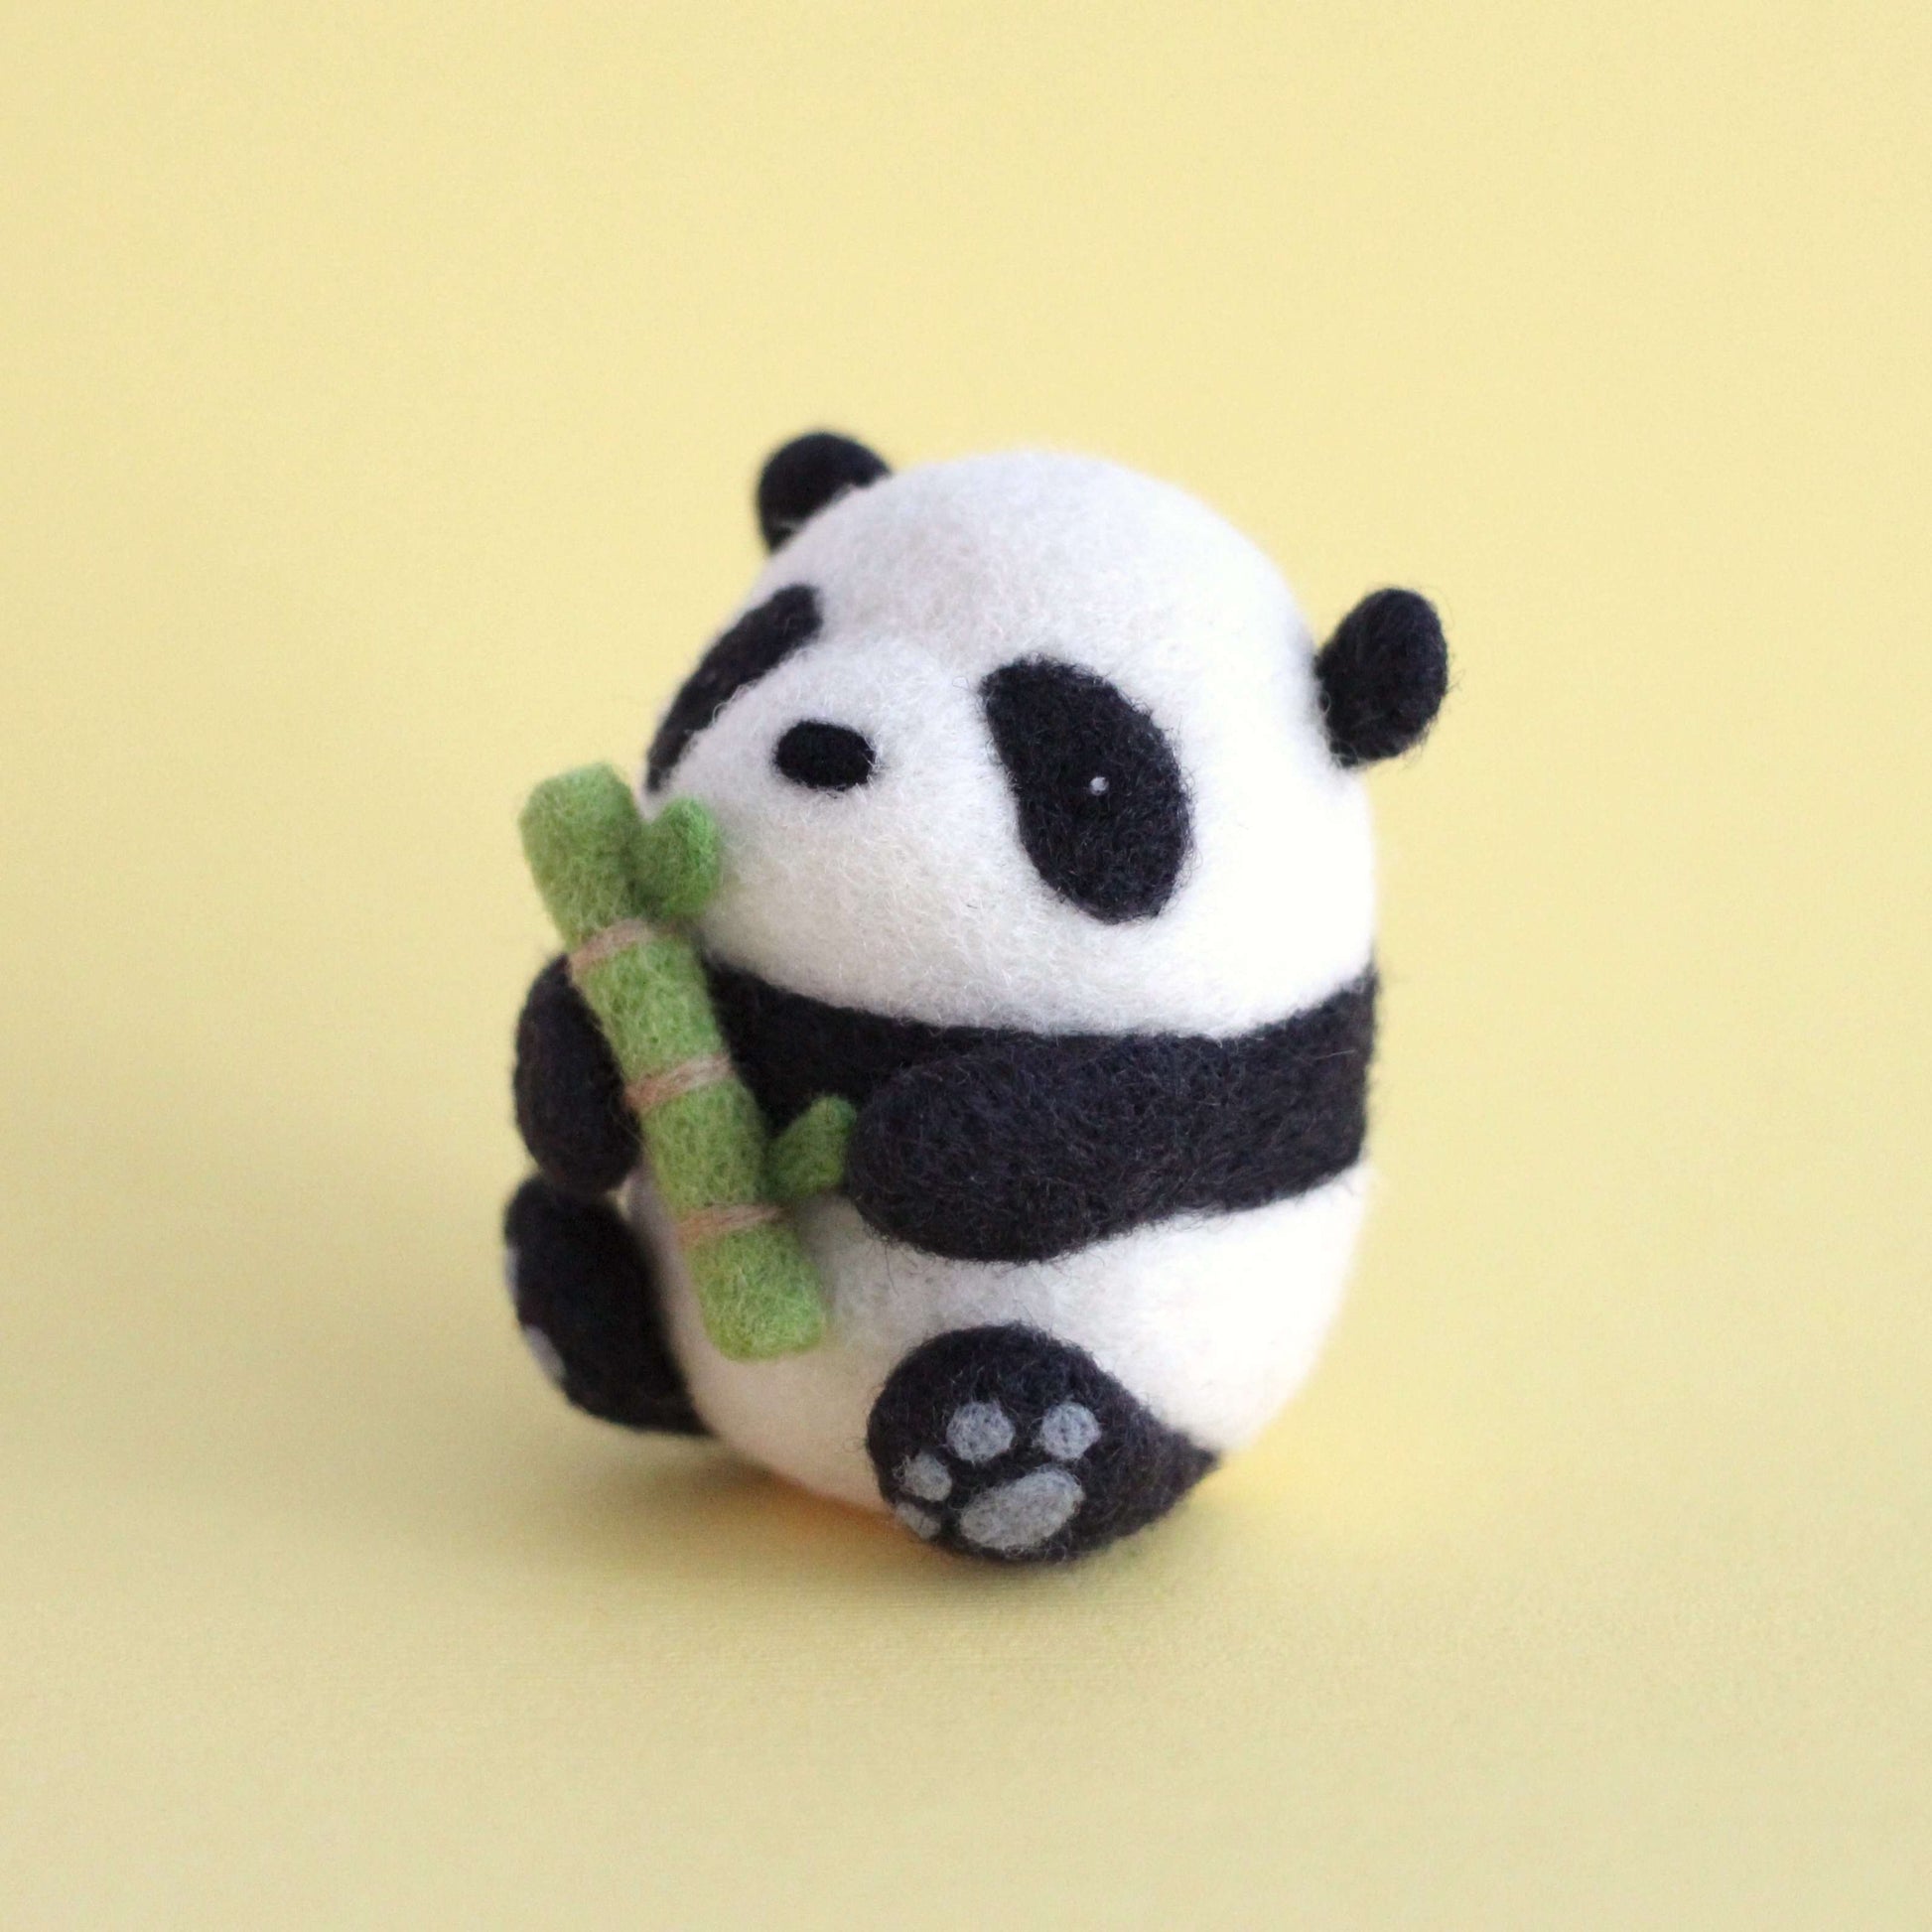 Needle Felted Panda holding Bamboo by Wild Whimsy Woolies